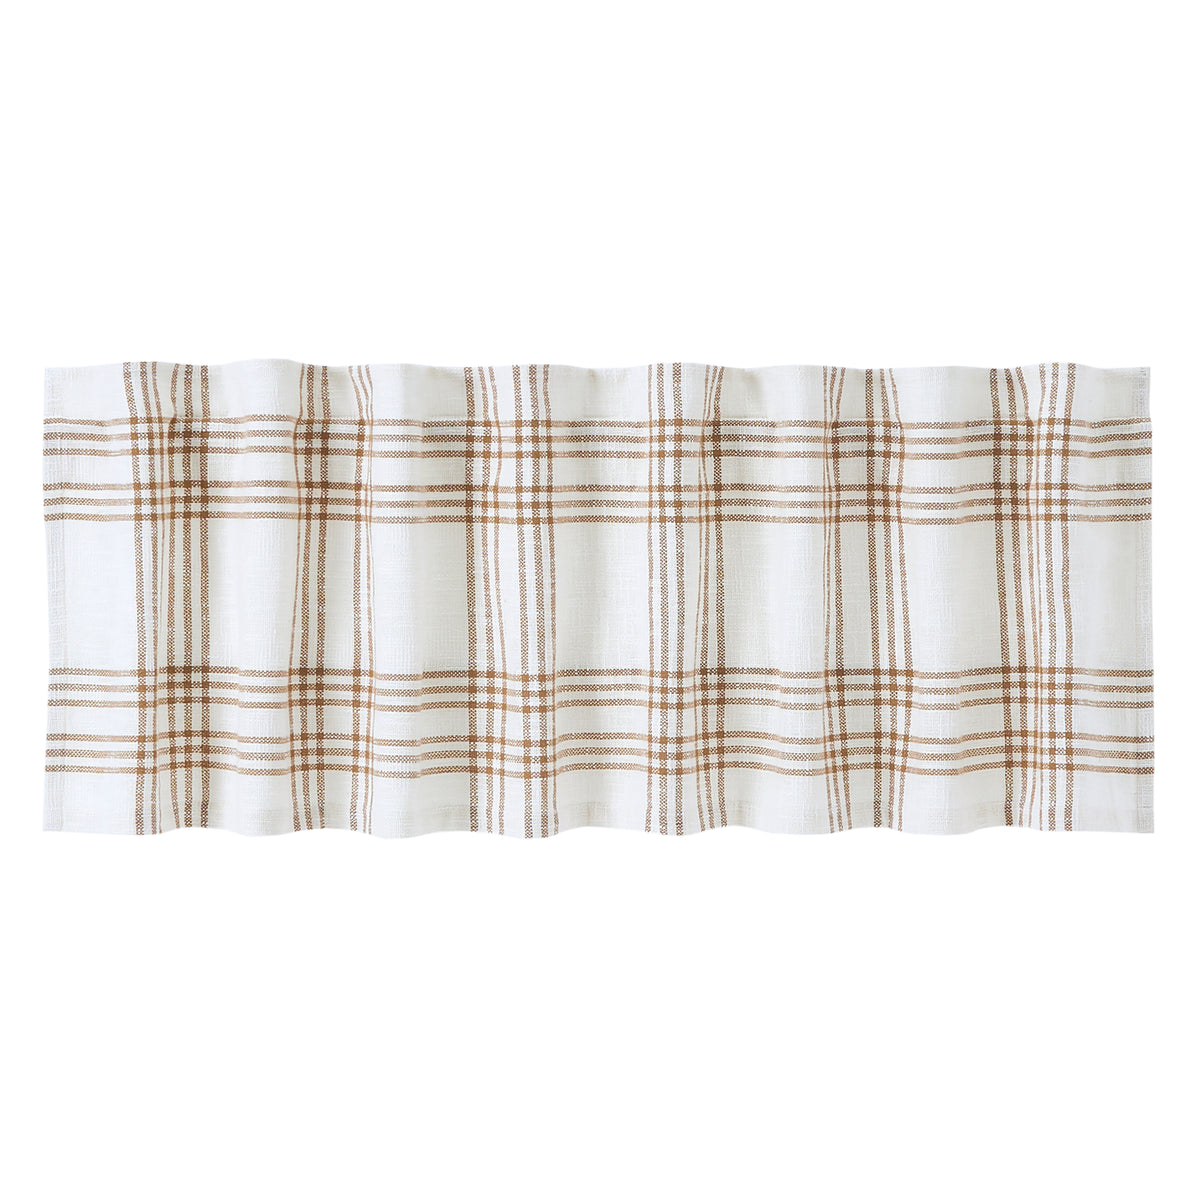 April & Olive Wheat Plaid Valance 19x72 By VHC Brands